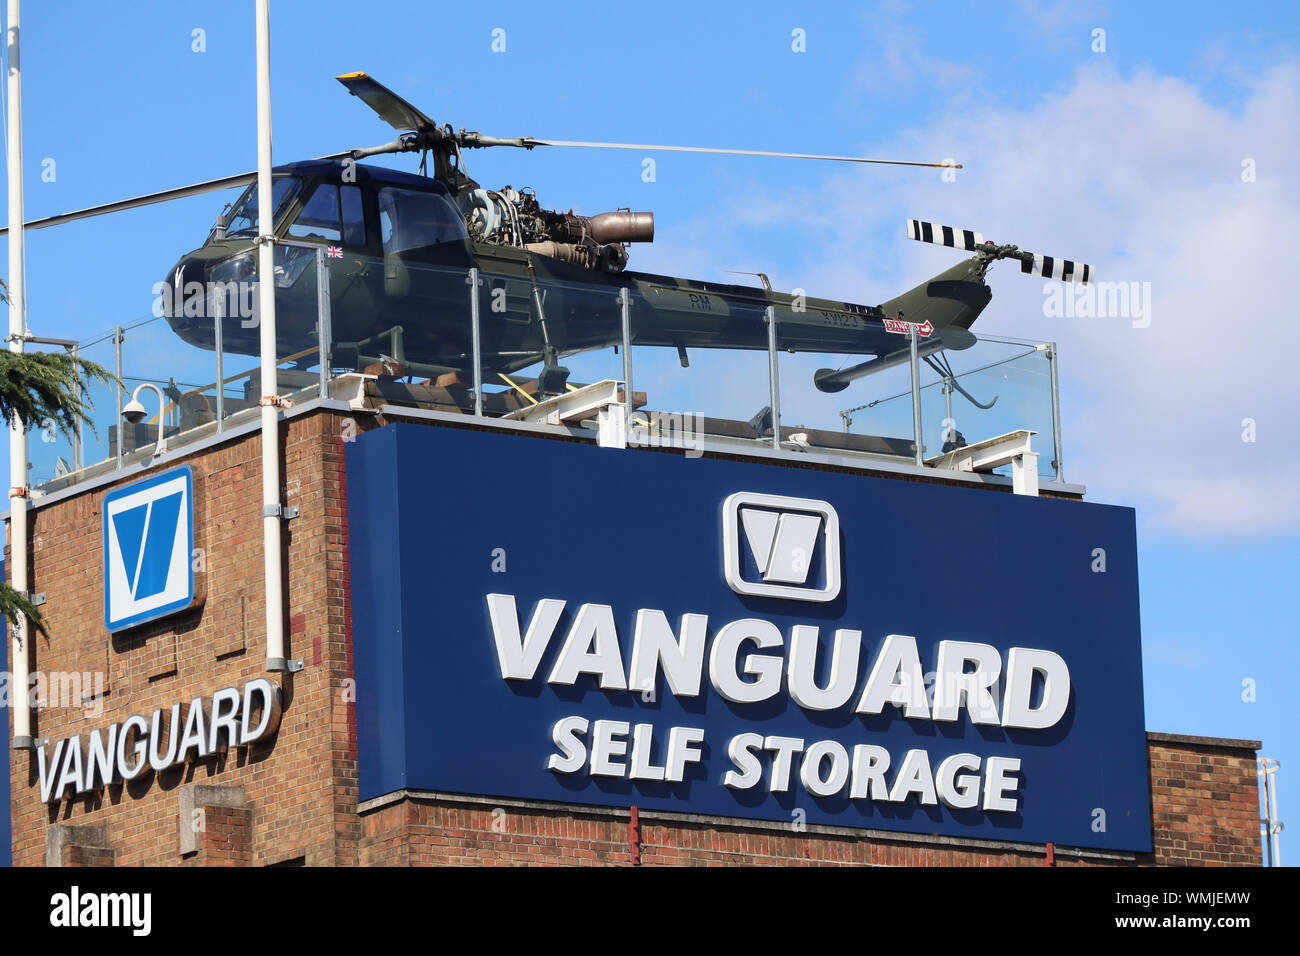 Westland Scout AH.1 XV123, British Army Air Corps Helicopter, Vanguard Self Storage, London, UK, 05 September 2019, Photo by Richard Goldschmidt Stock Photo